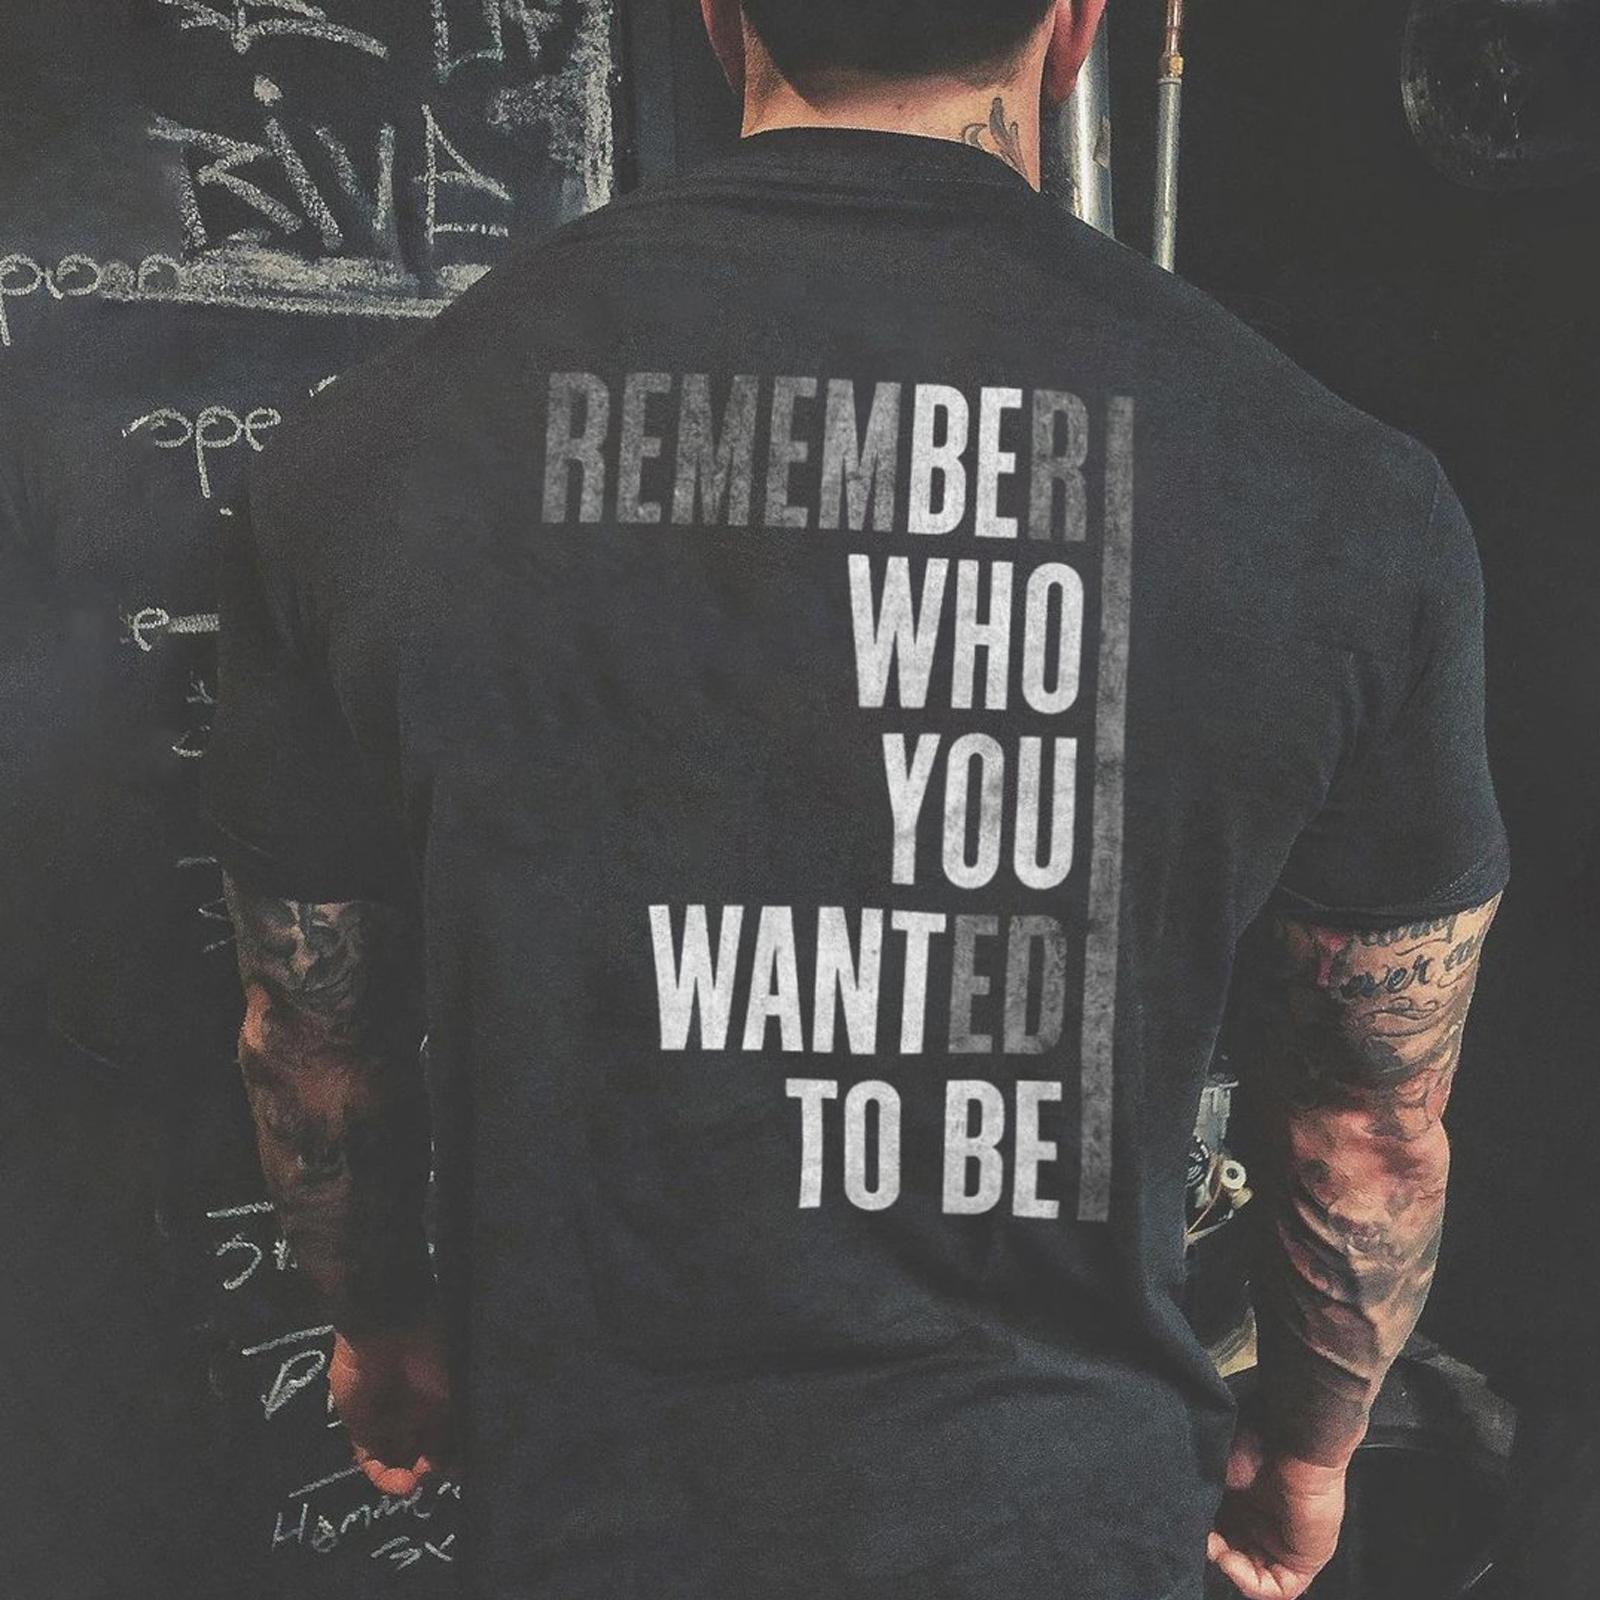 Livereid Remember Who You Wanted To Be Letter T-Shirt - Livereid